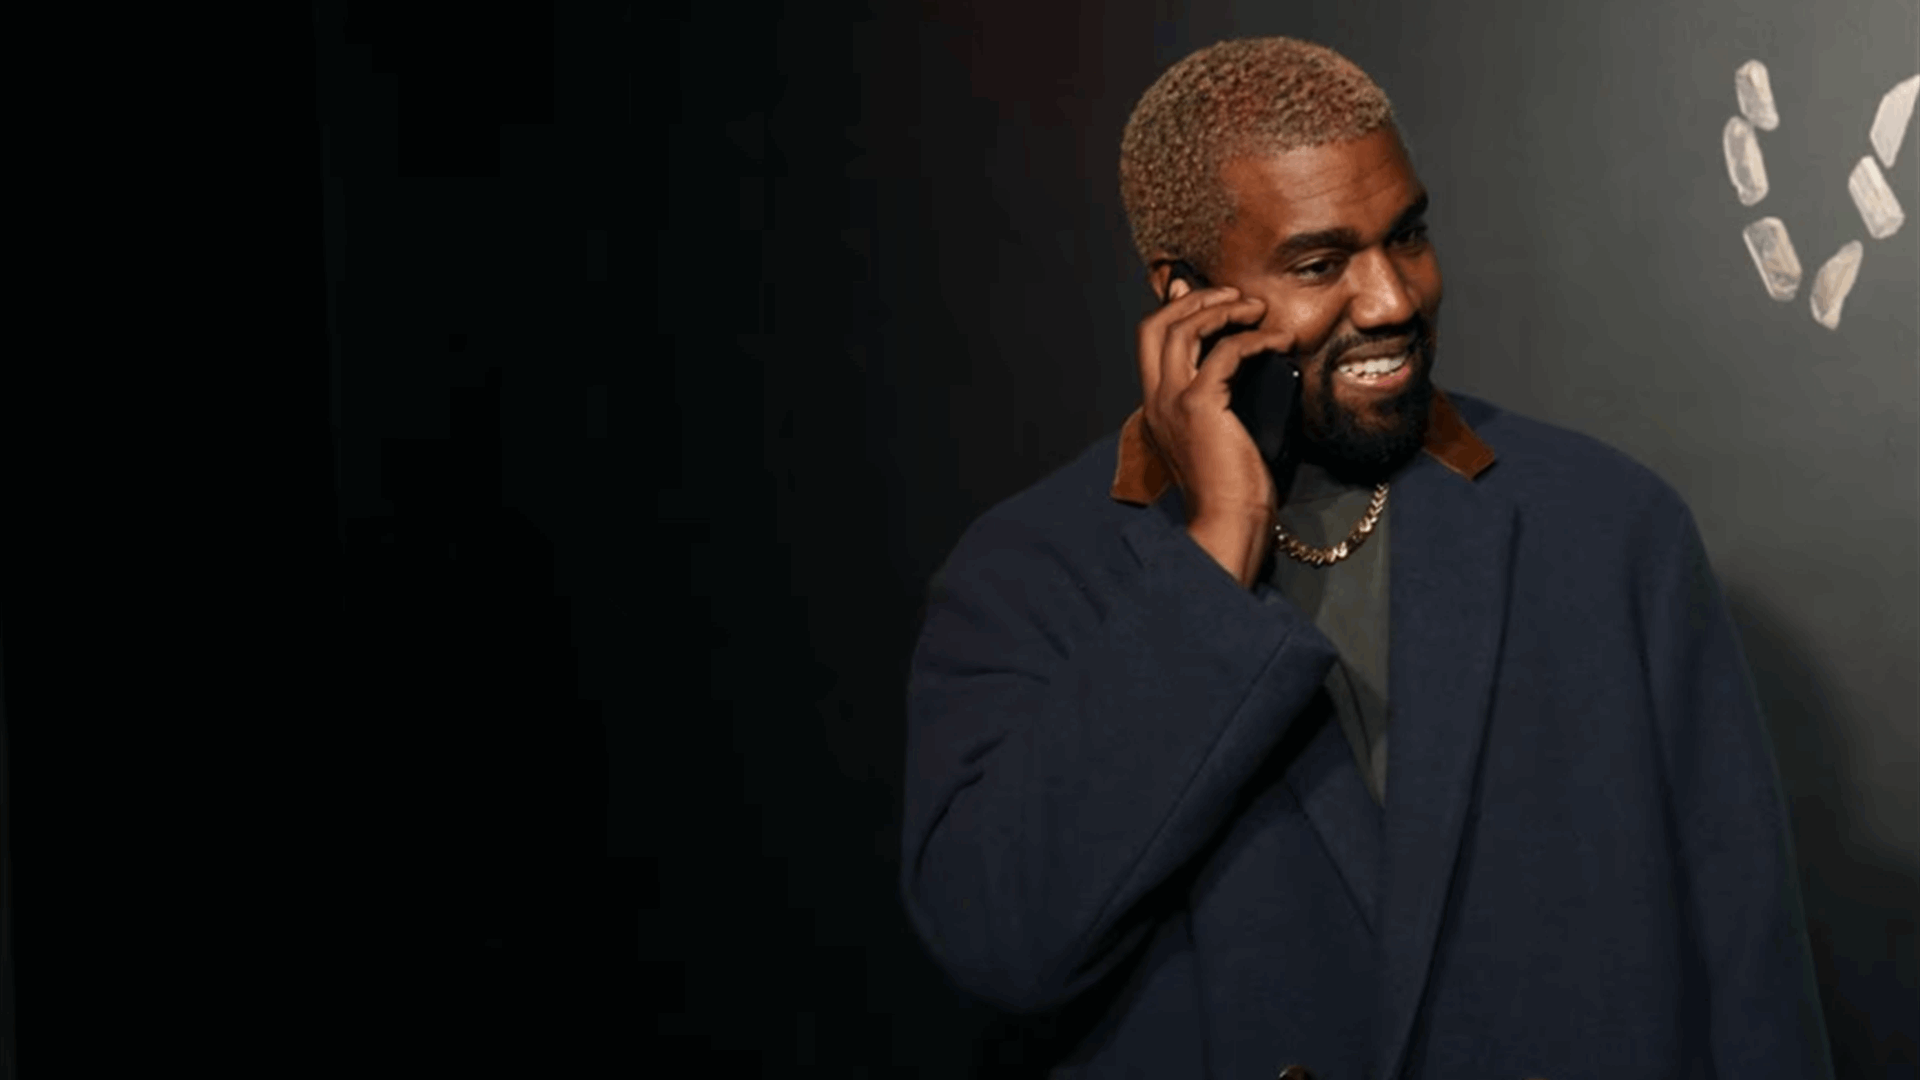 Australian minister says Kanye West could be denied entry